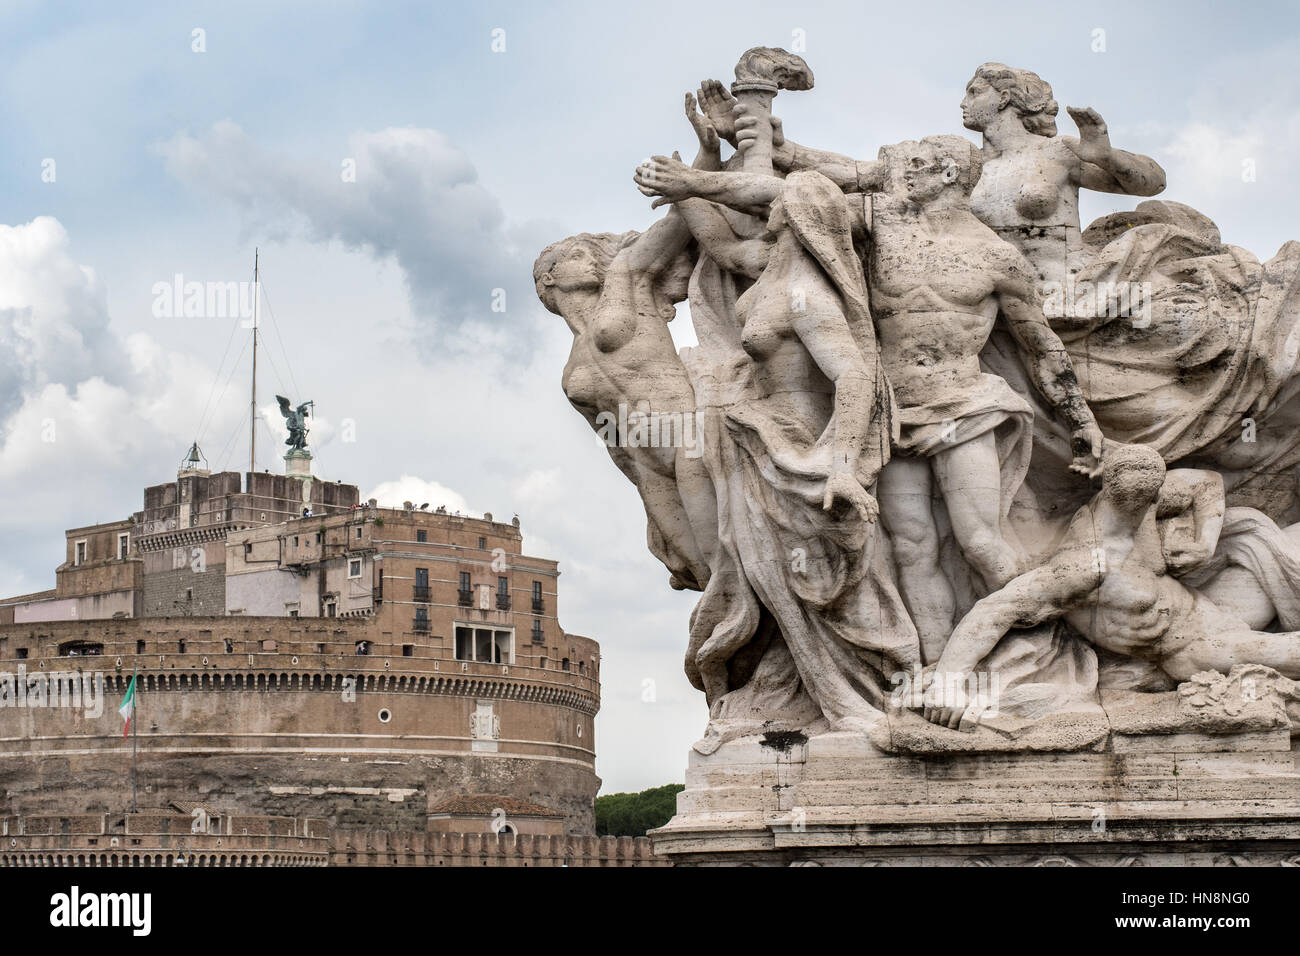 Rome, Italy- Close up of a Roman sculpture with Castel Sant'Angelo and the Hadrian's Mausoleum in the background built in 123 AD by Emperor Hadrian as Stock Photo